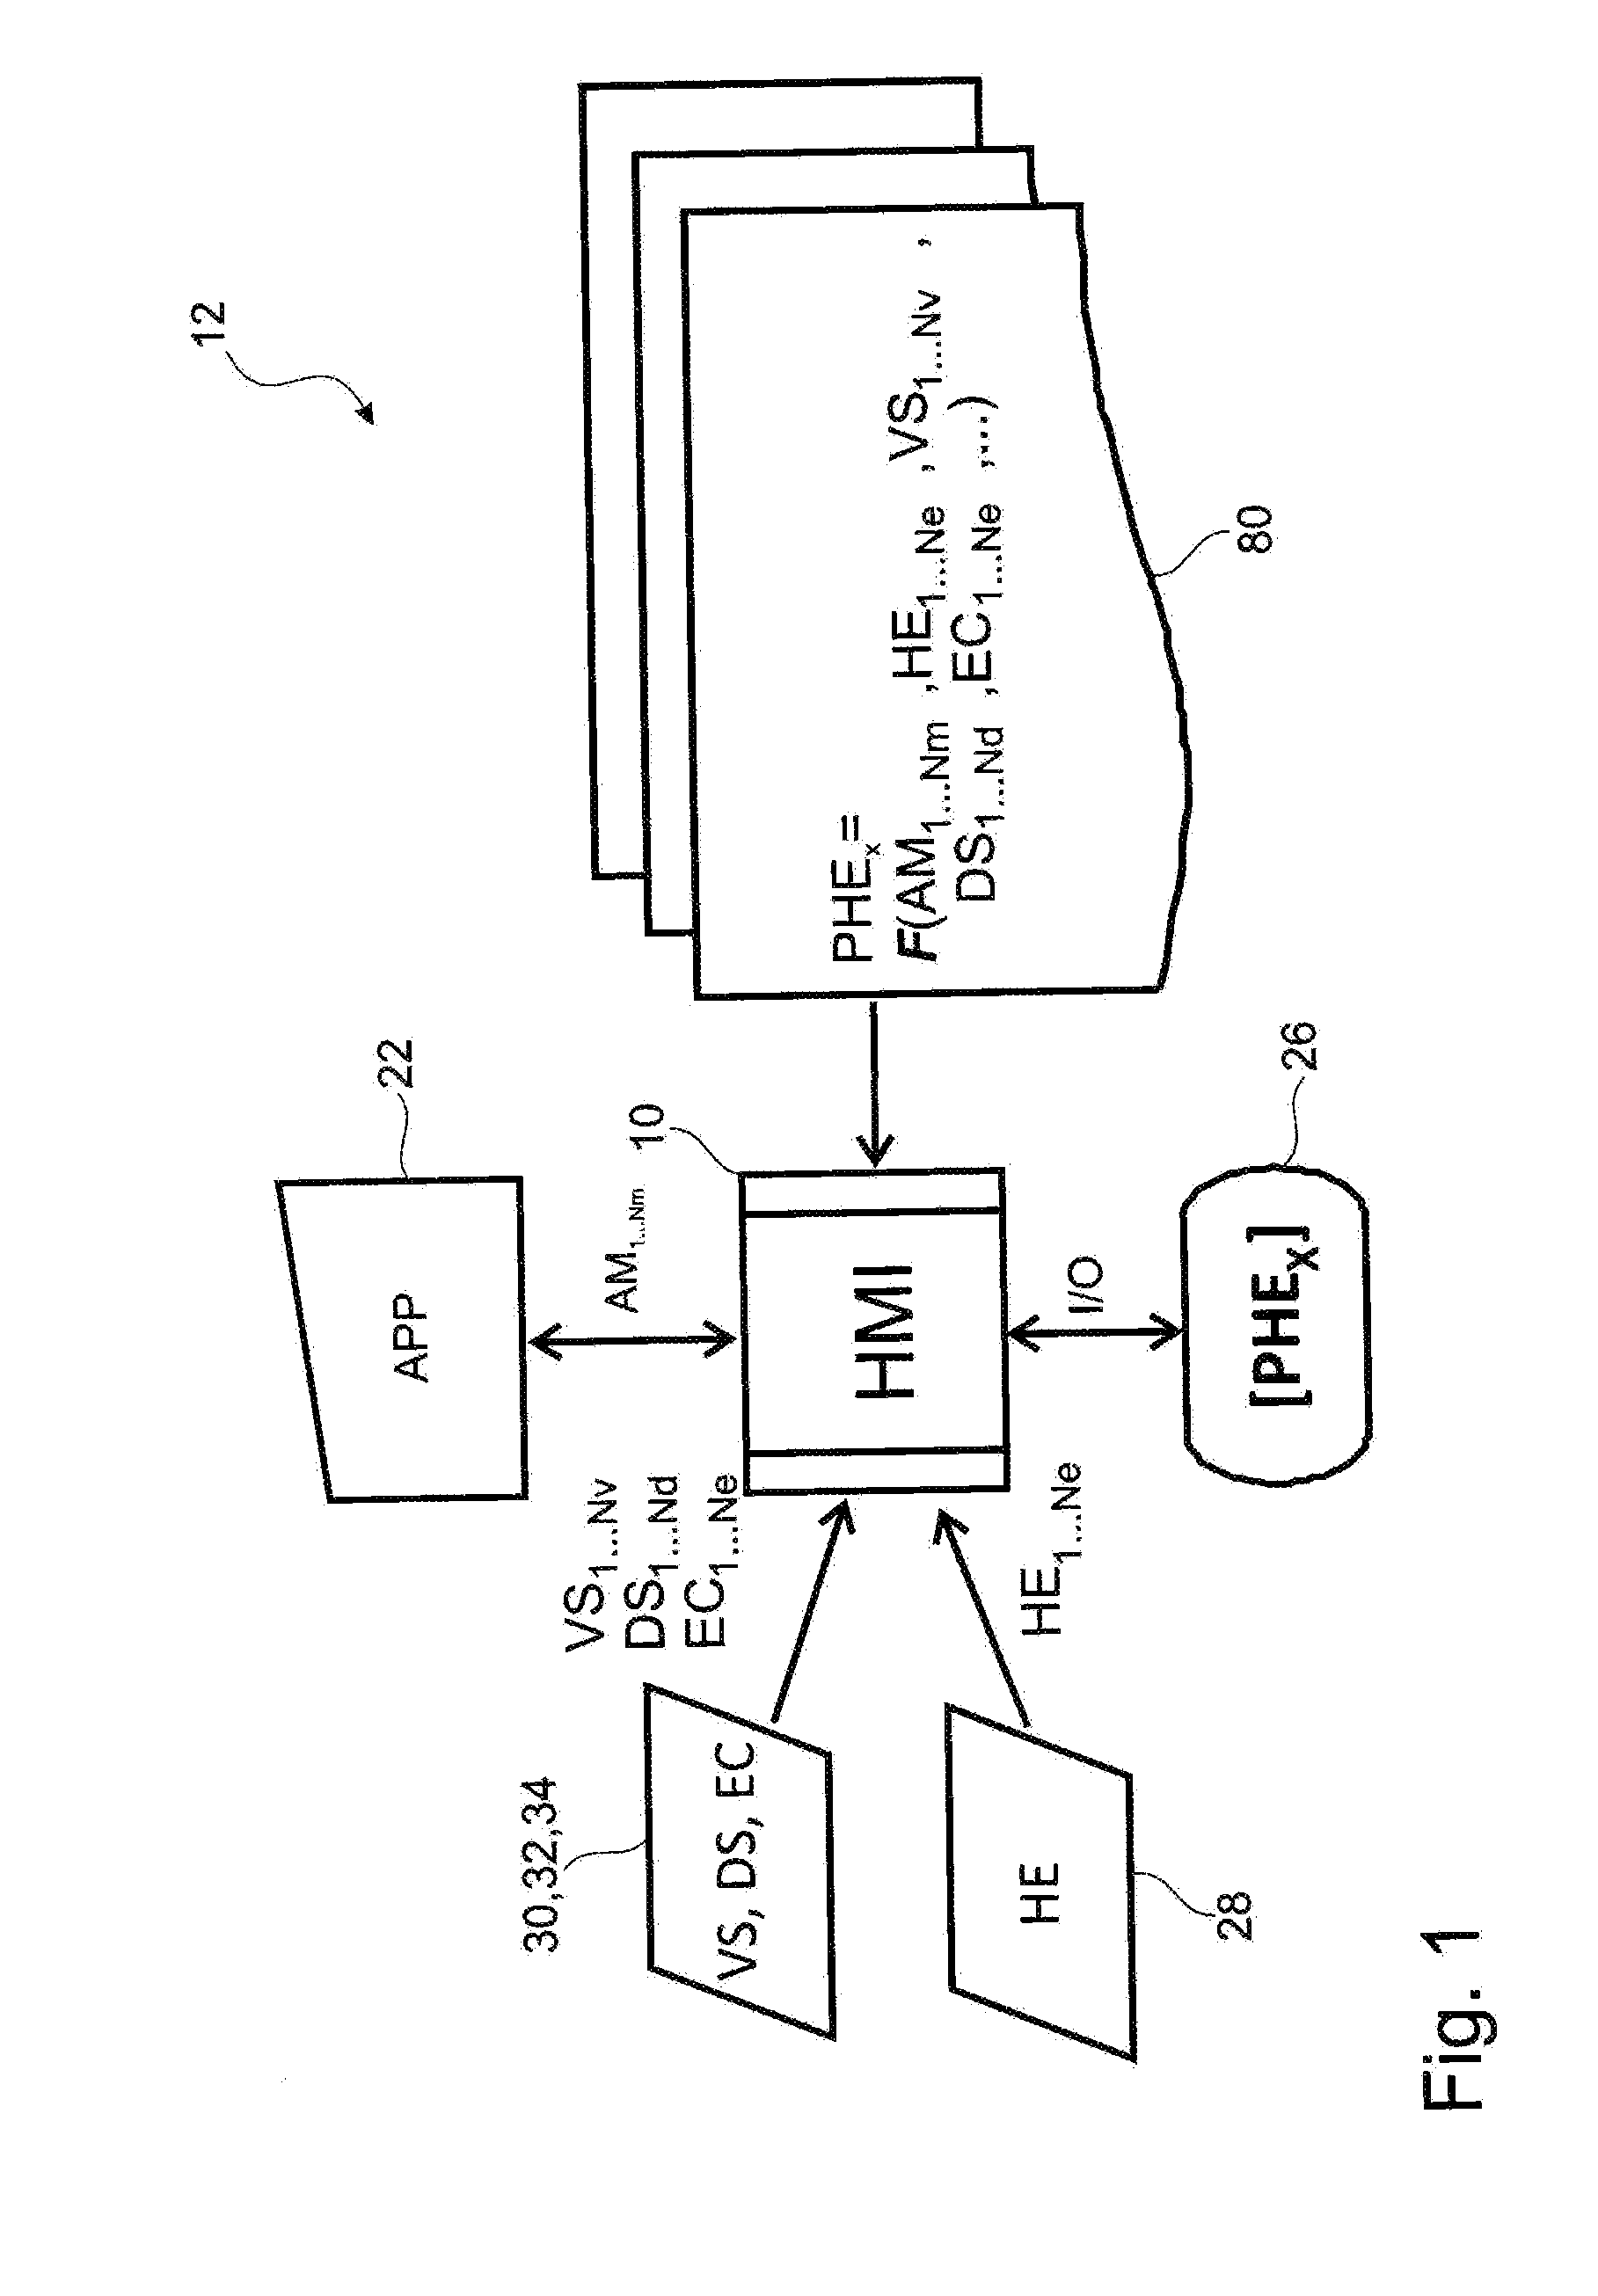 Human machine interface unit for a communication device in a vehicle and I/O method using said human machine interface unit